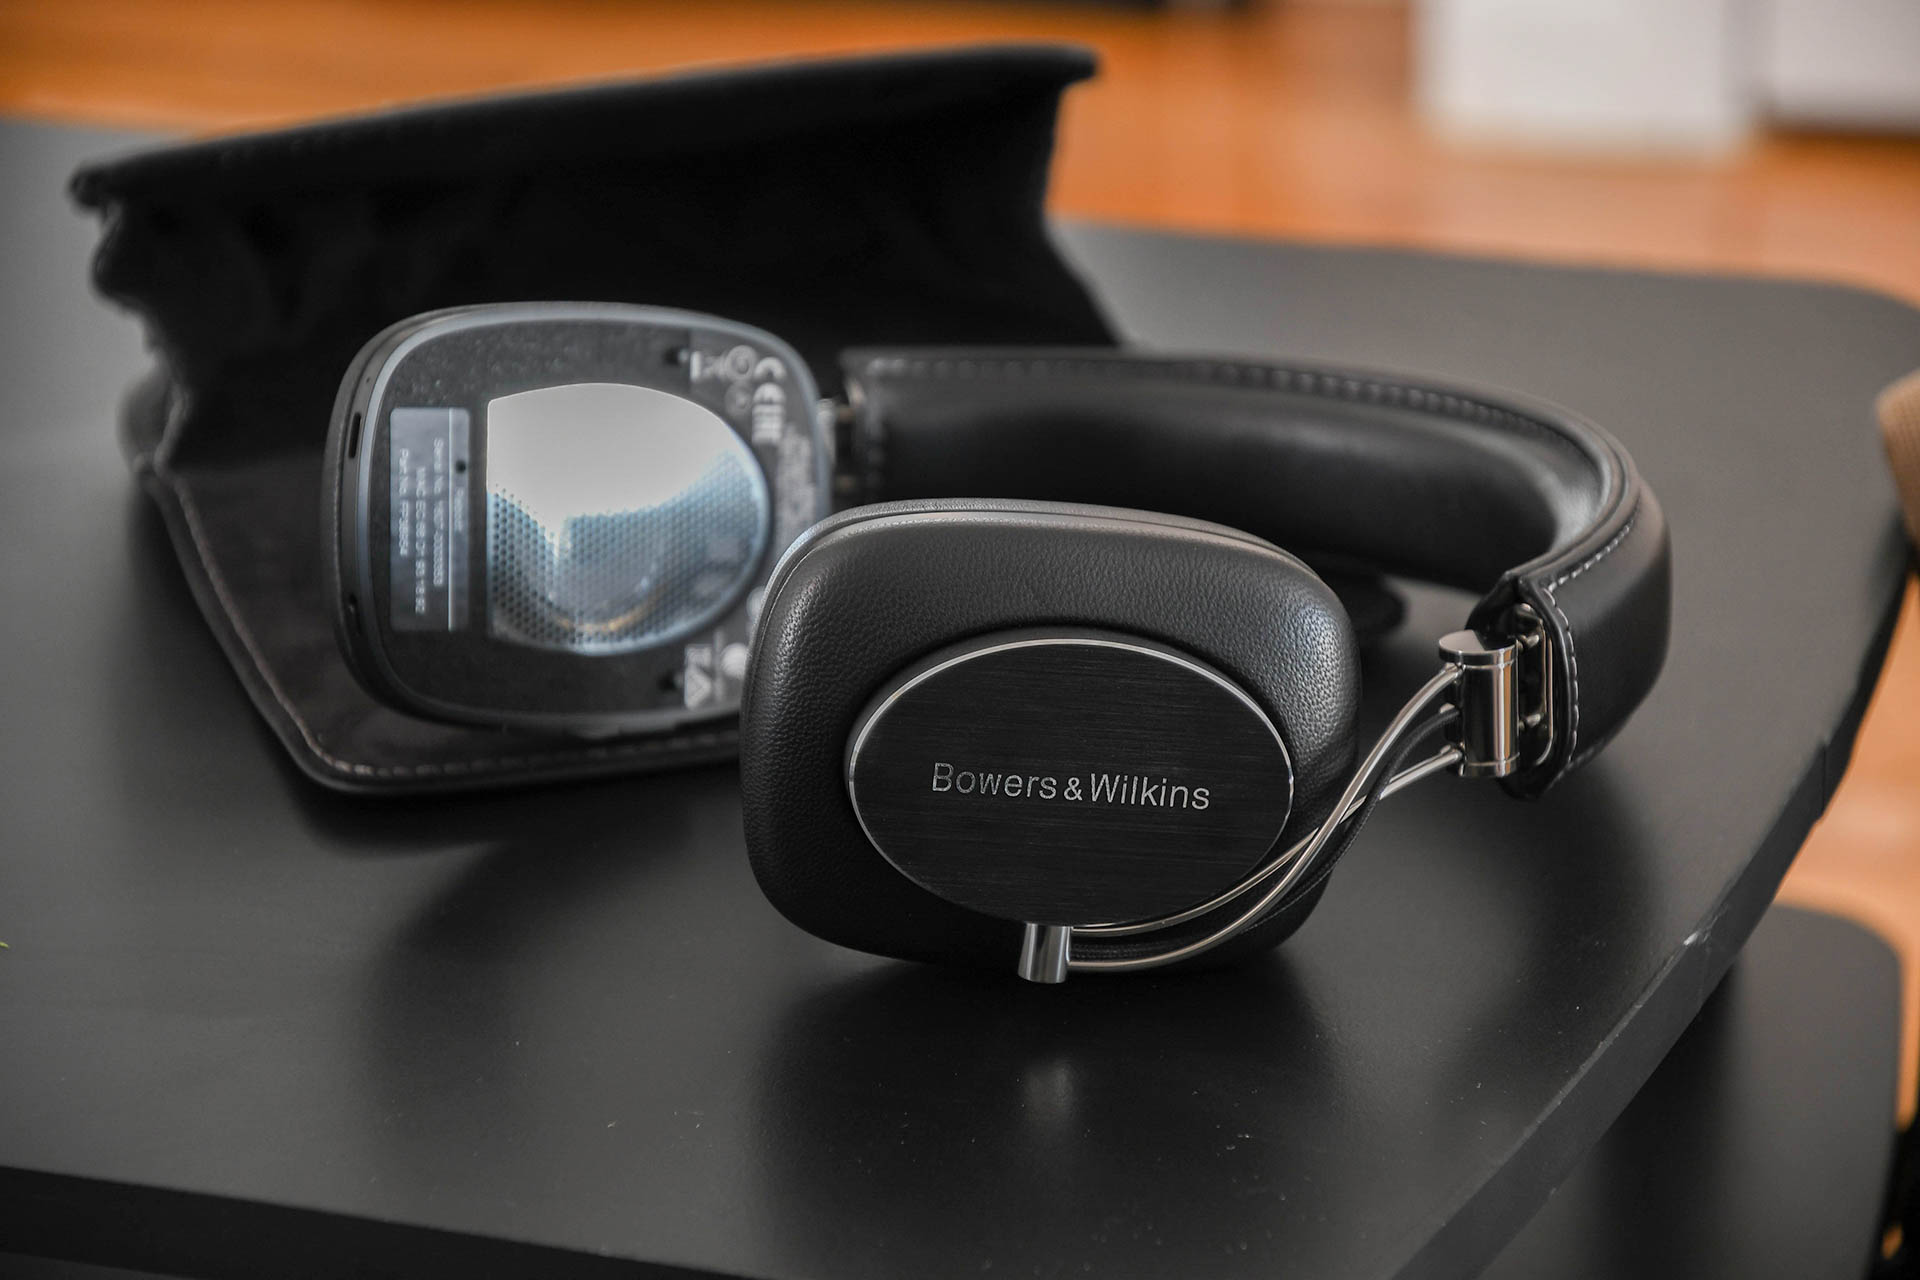 Bower & Wilkins' P7 wireless headphones are all luxe and great